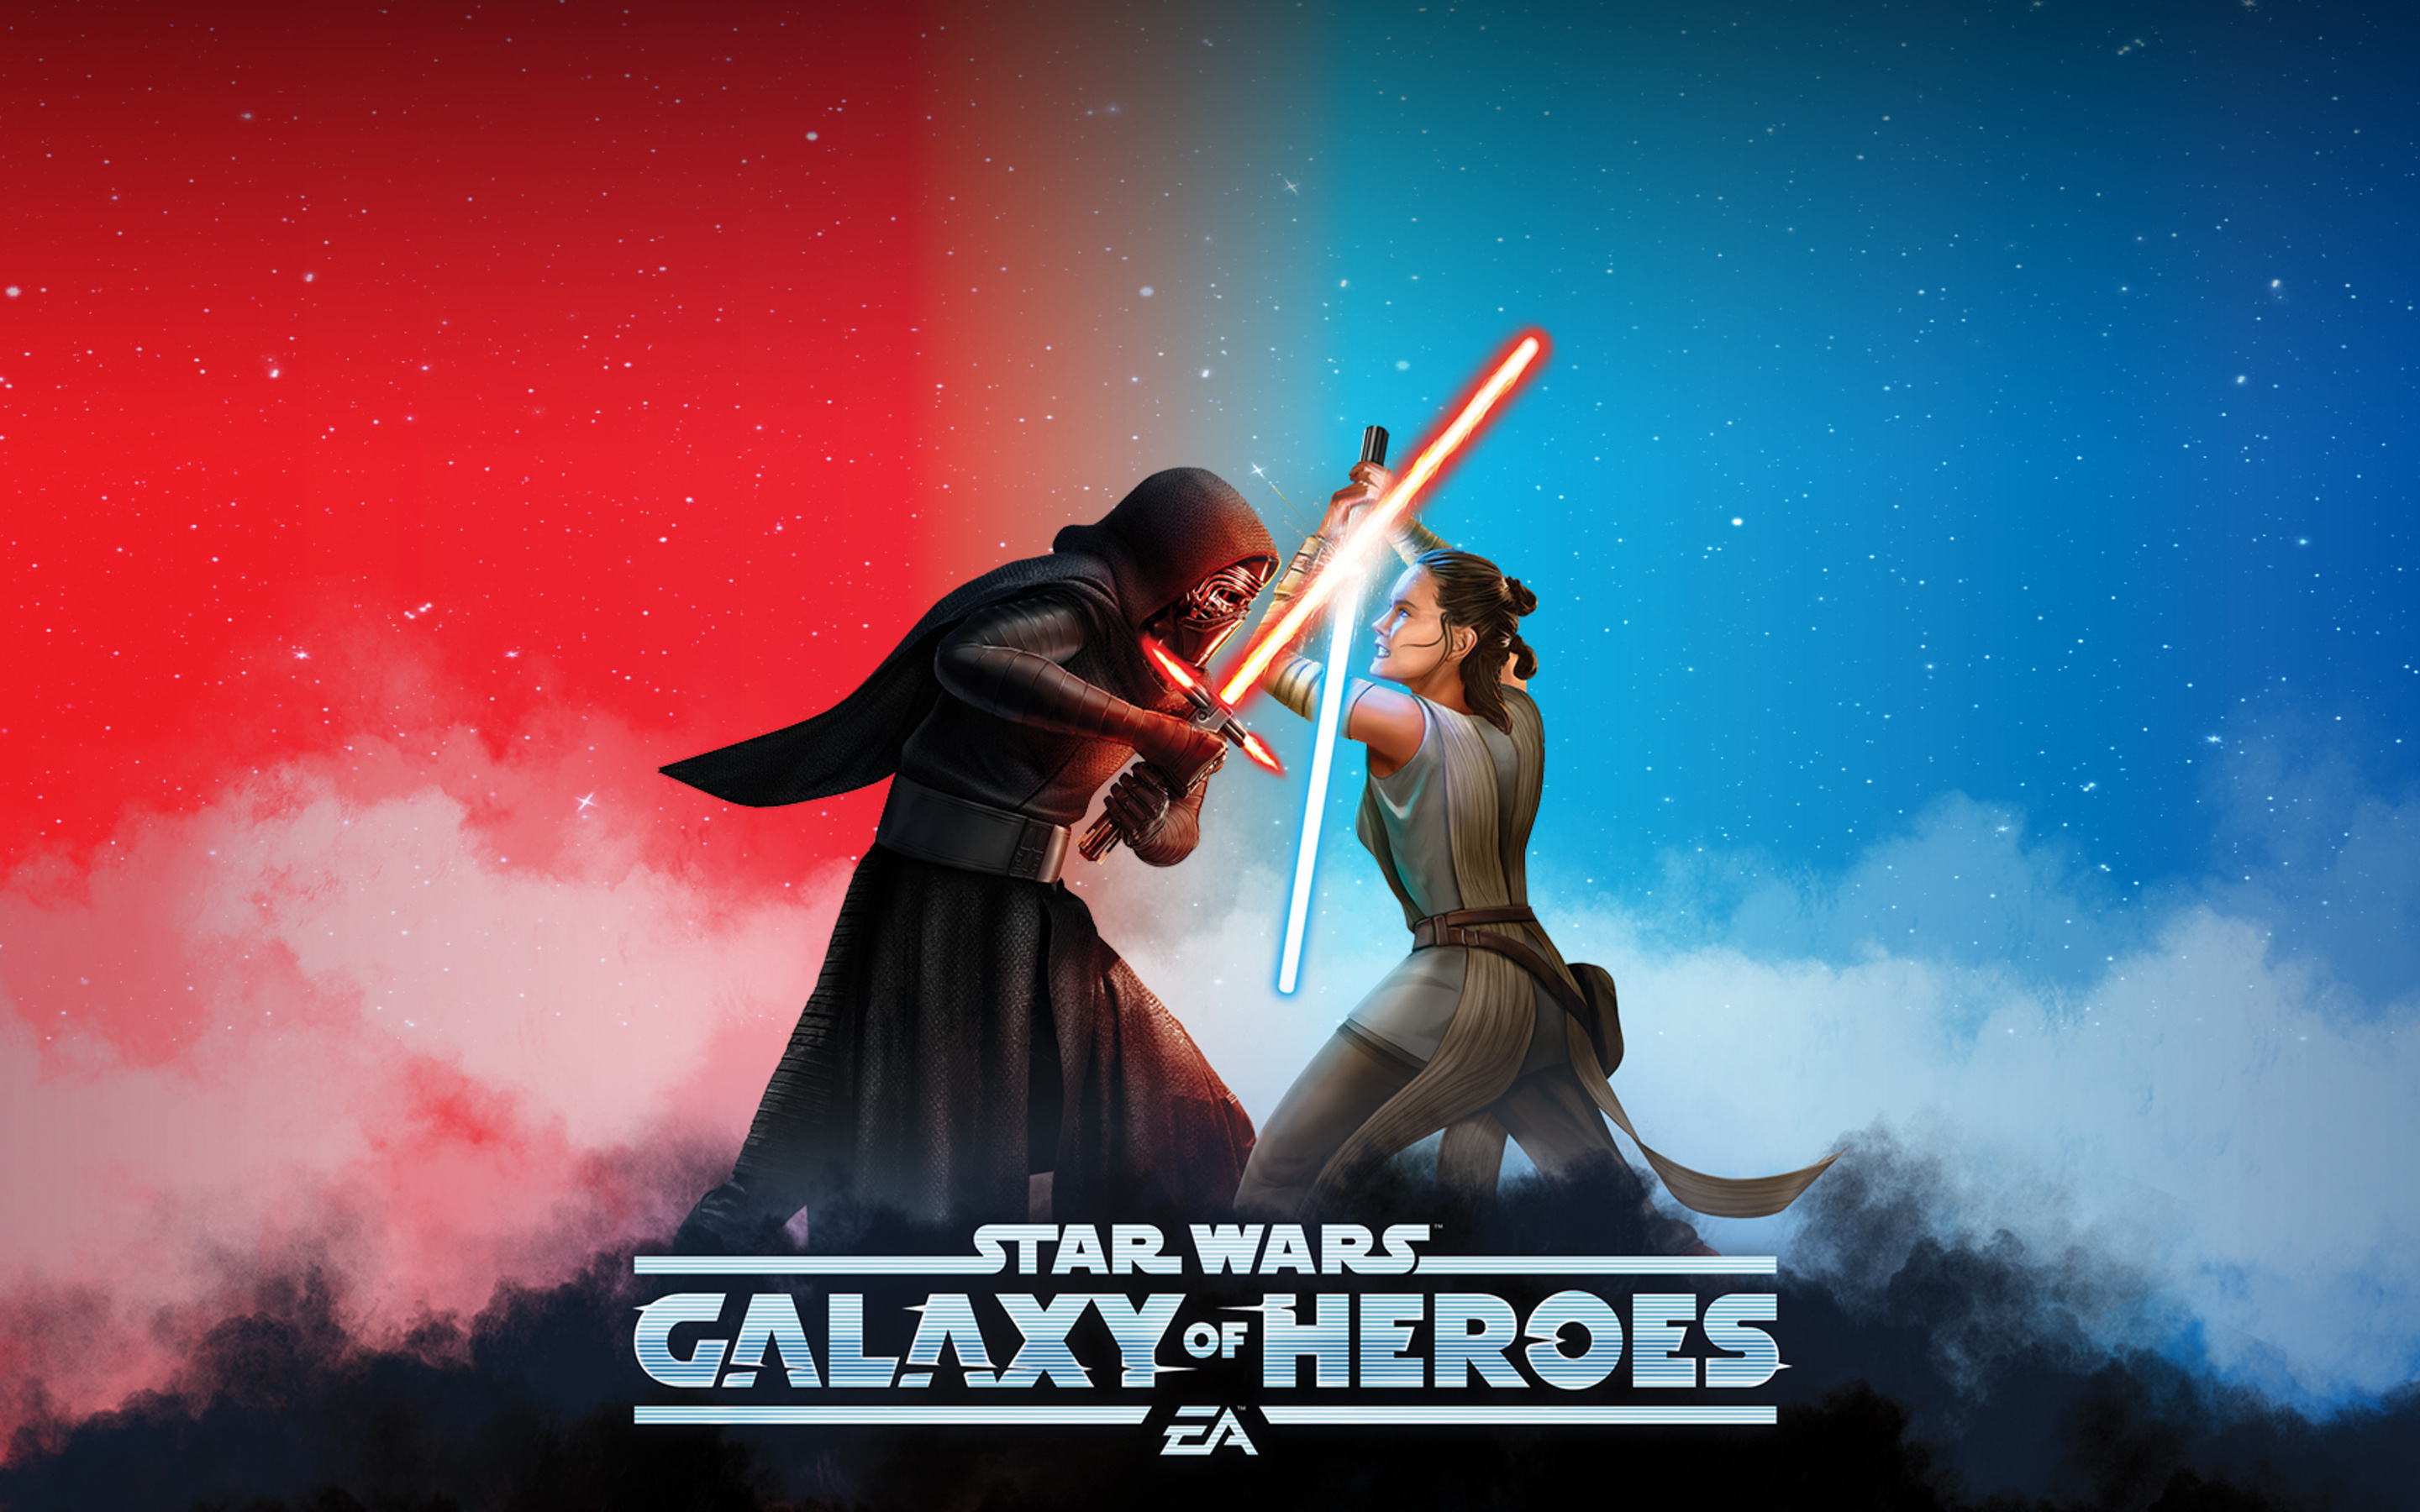 Star Wars: Galaxy of Heroes: SW:GoH, A mobile game by Electronic Arts. 2880x1800 HD Background.